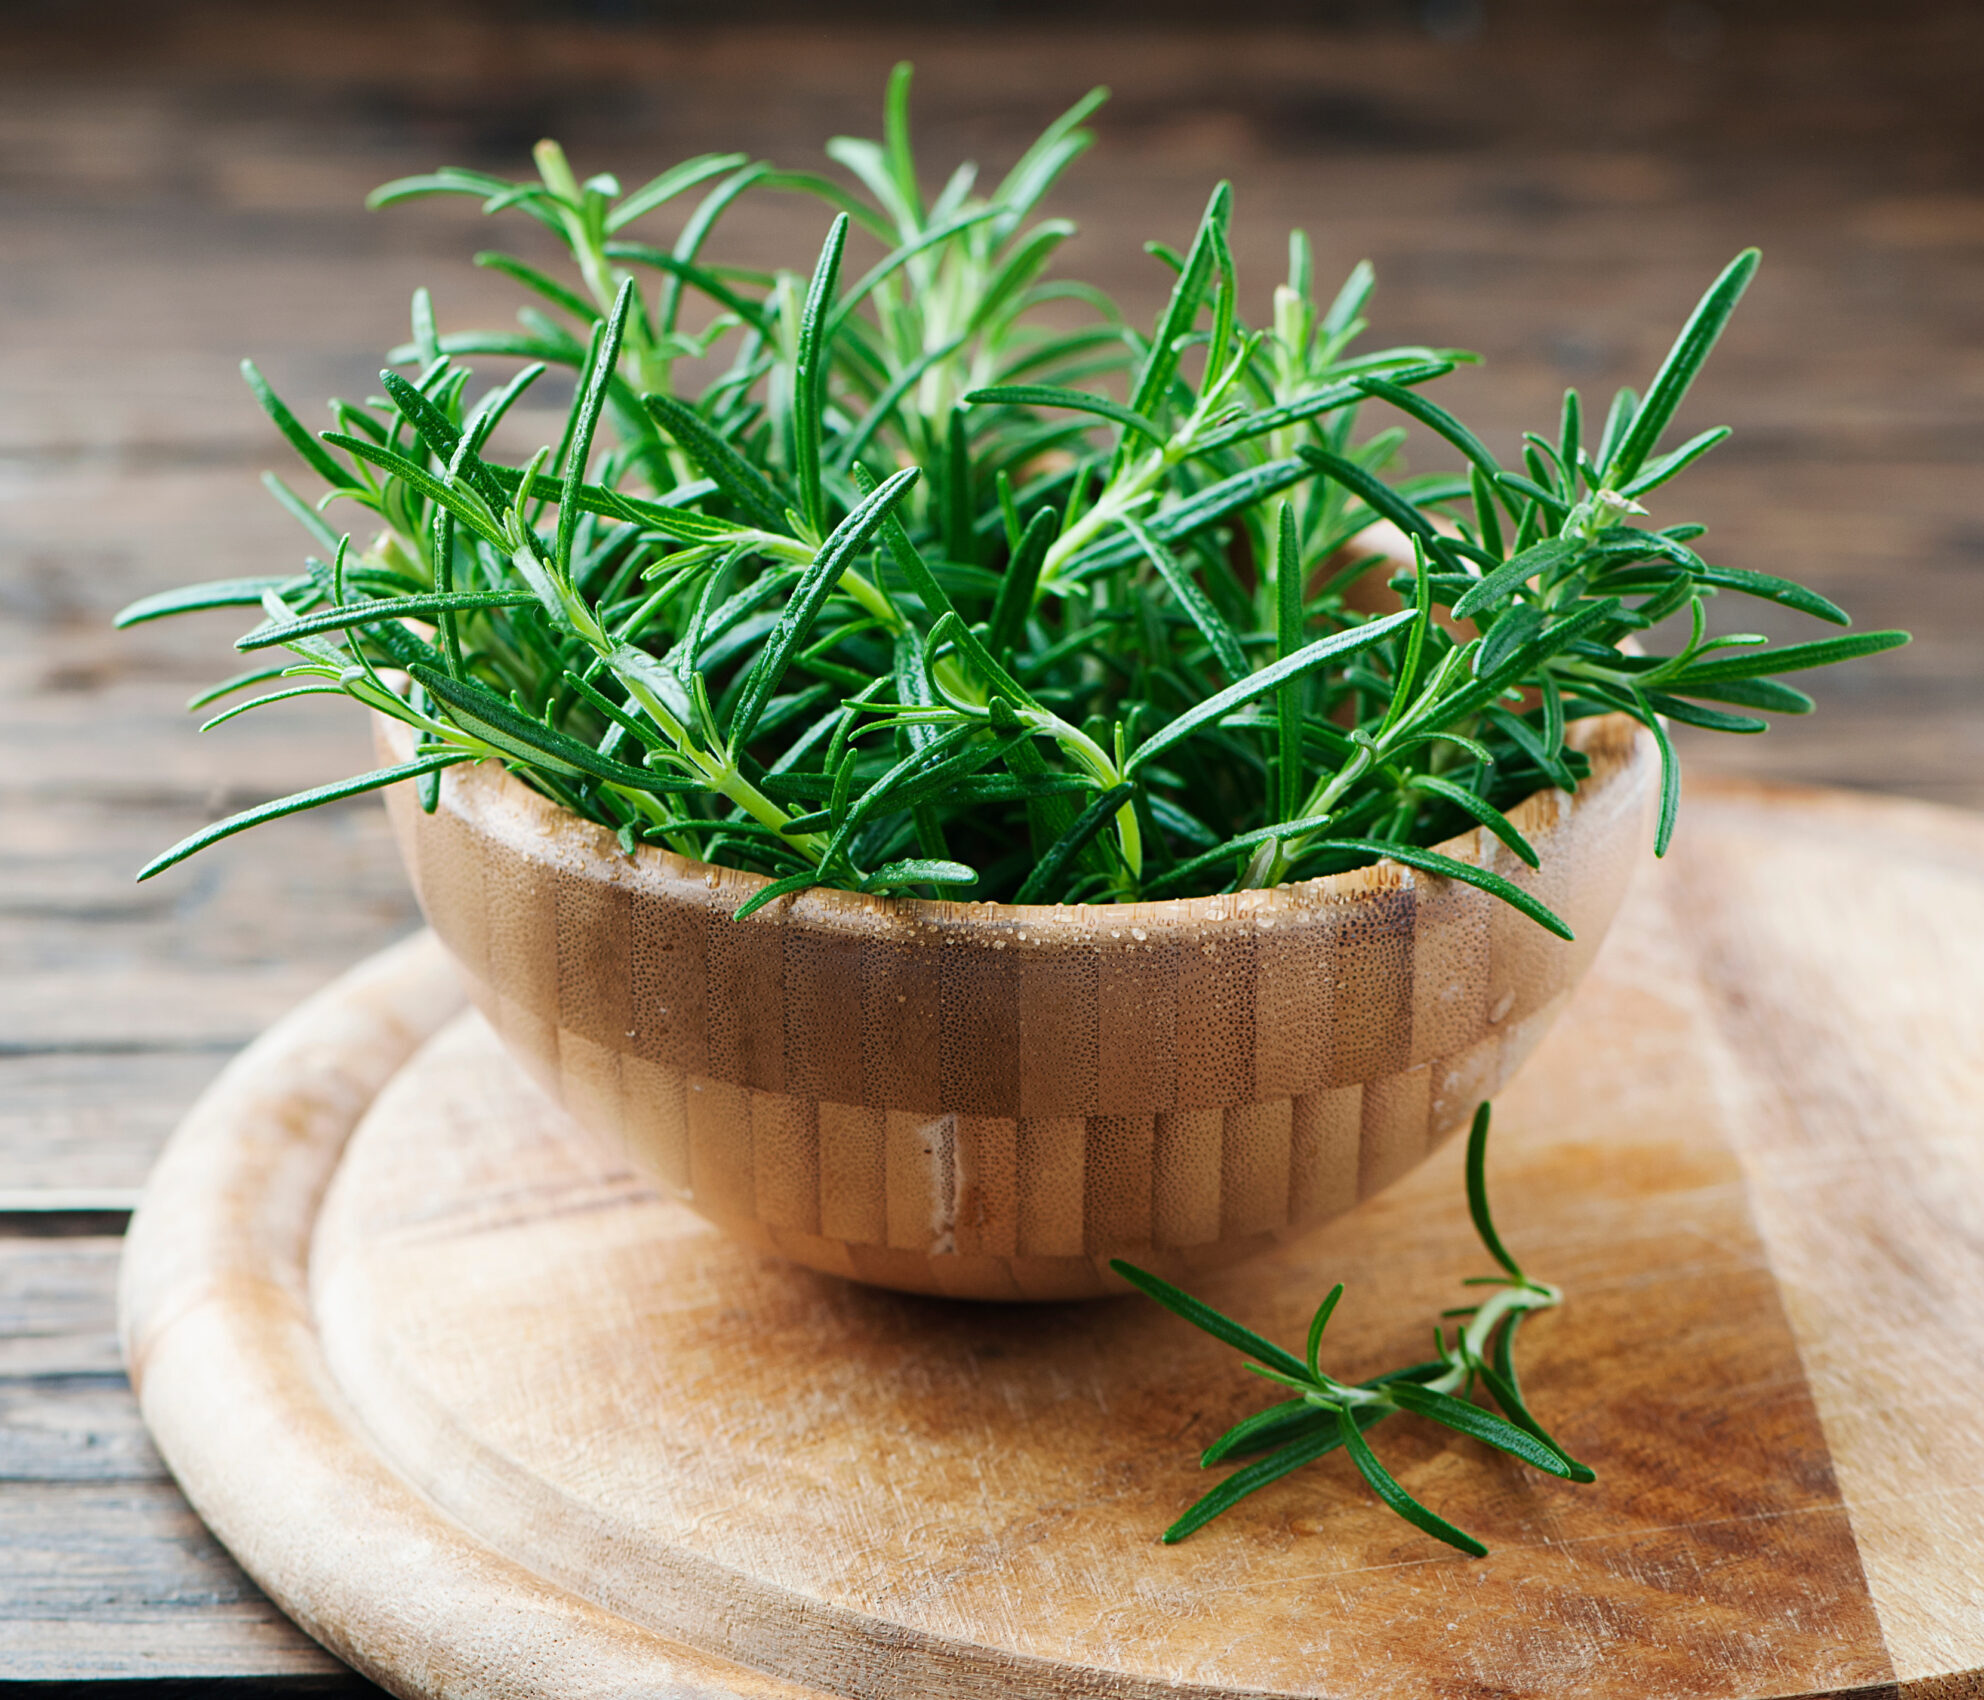 The Effect of Rosemary Essential Oil on Memory